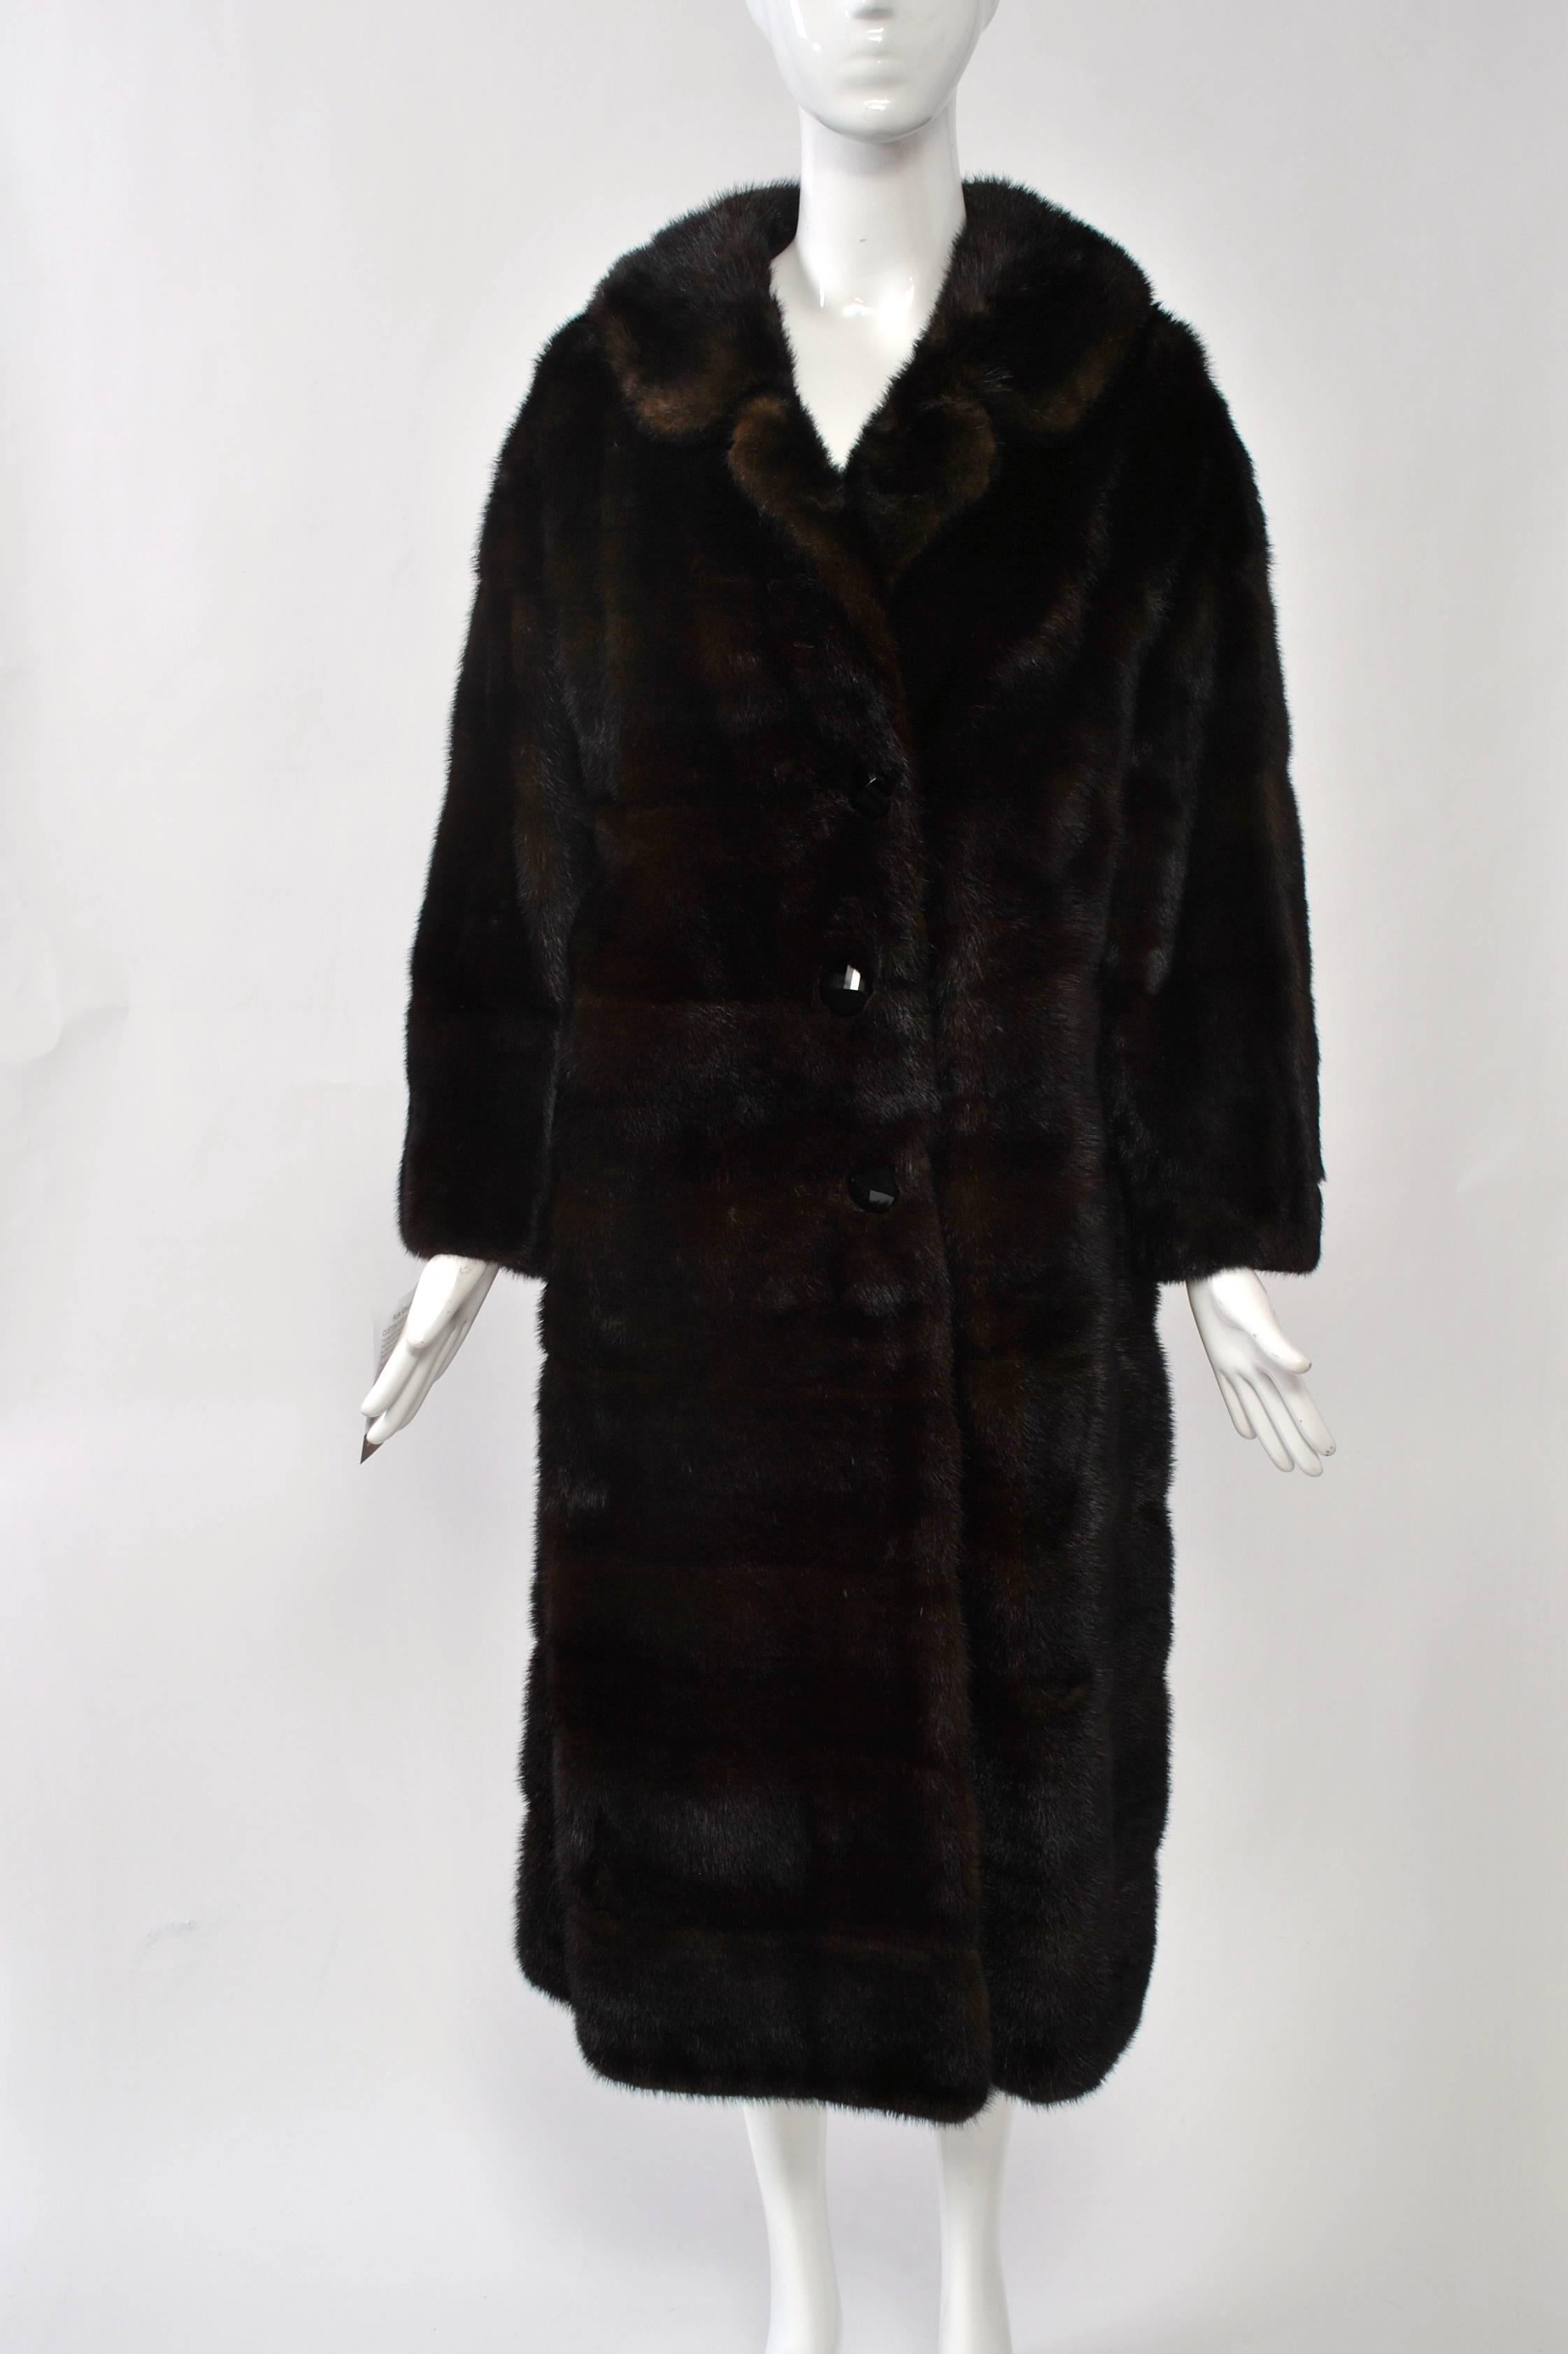 1960s-'70s mahogany mink coat with horizontal skins. Single breasted with spread collar that can be buttoned closed for warmth. Silk lining with pleated hem and velvet trim.